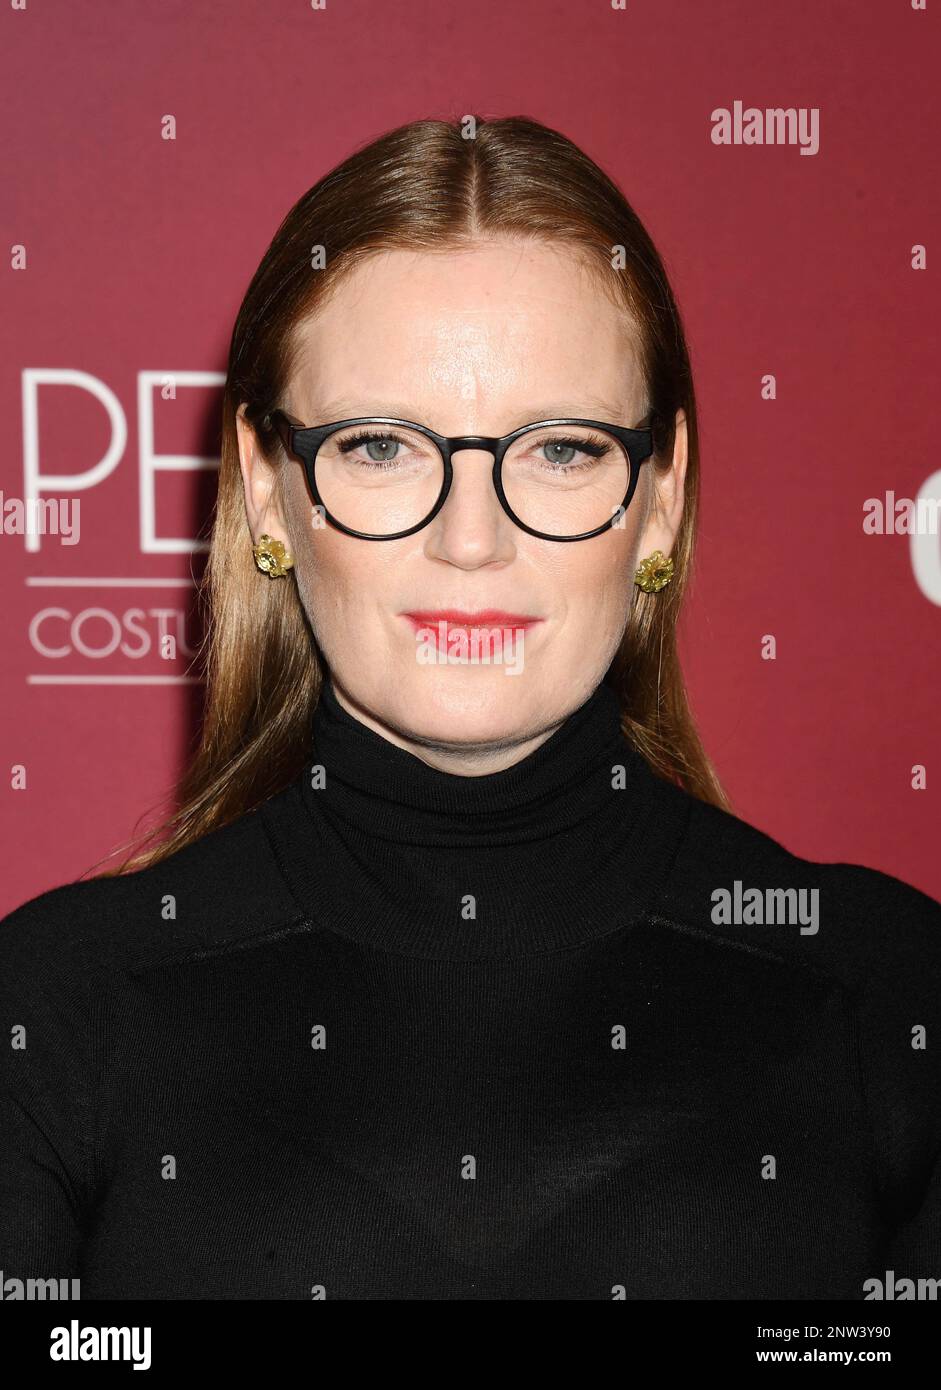 Los Angeles, California, USA. 27th Feb, 2023. Sarah Polley attends the 25th Annual Costume Designers Guild Awards at the Fairmont Century Plaza on February 27, 2023 in Los Angeles, California. Credit: Jeffrey Mayer/Jtm Photos/Media Punch/Alamy Live News Stock Photo